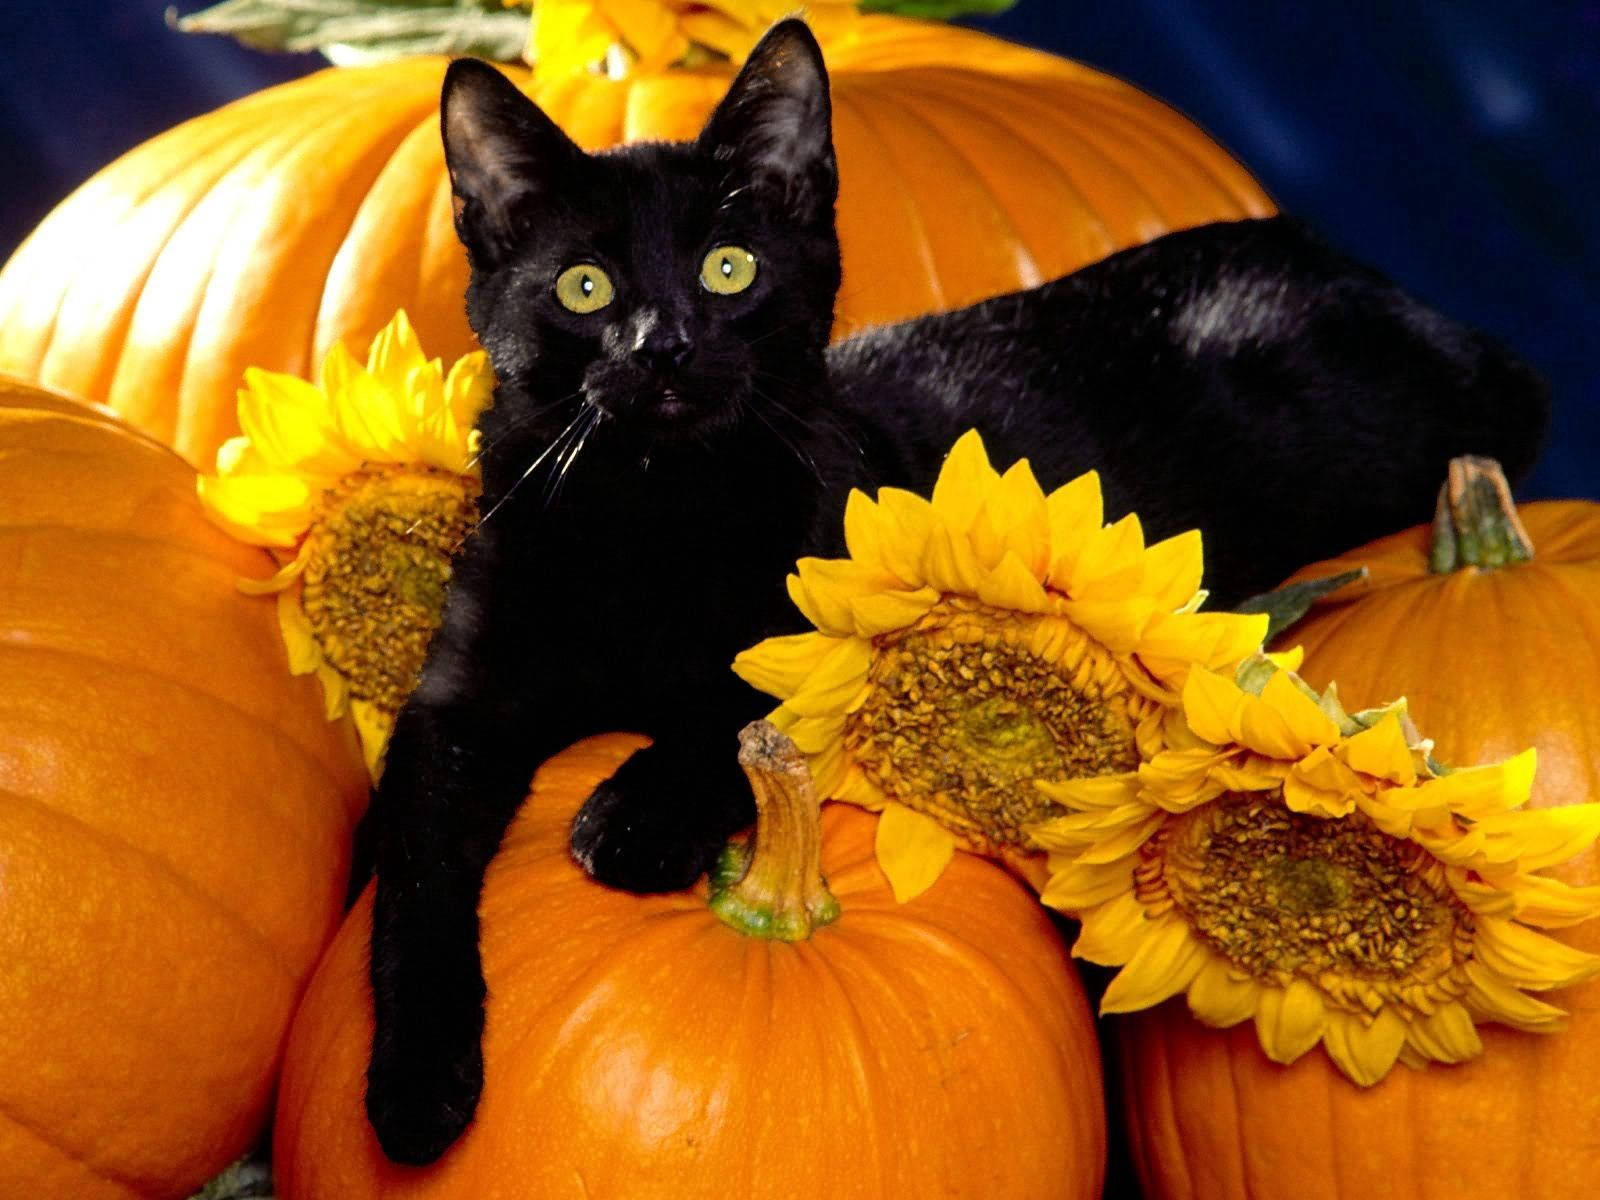 This Halloween season, one of the spookiest decorations we have is our black cat atop a pumpkin. Wallpaper